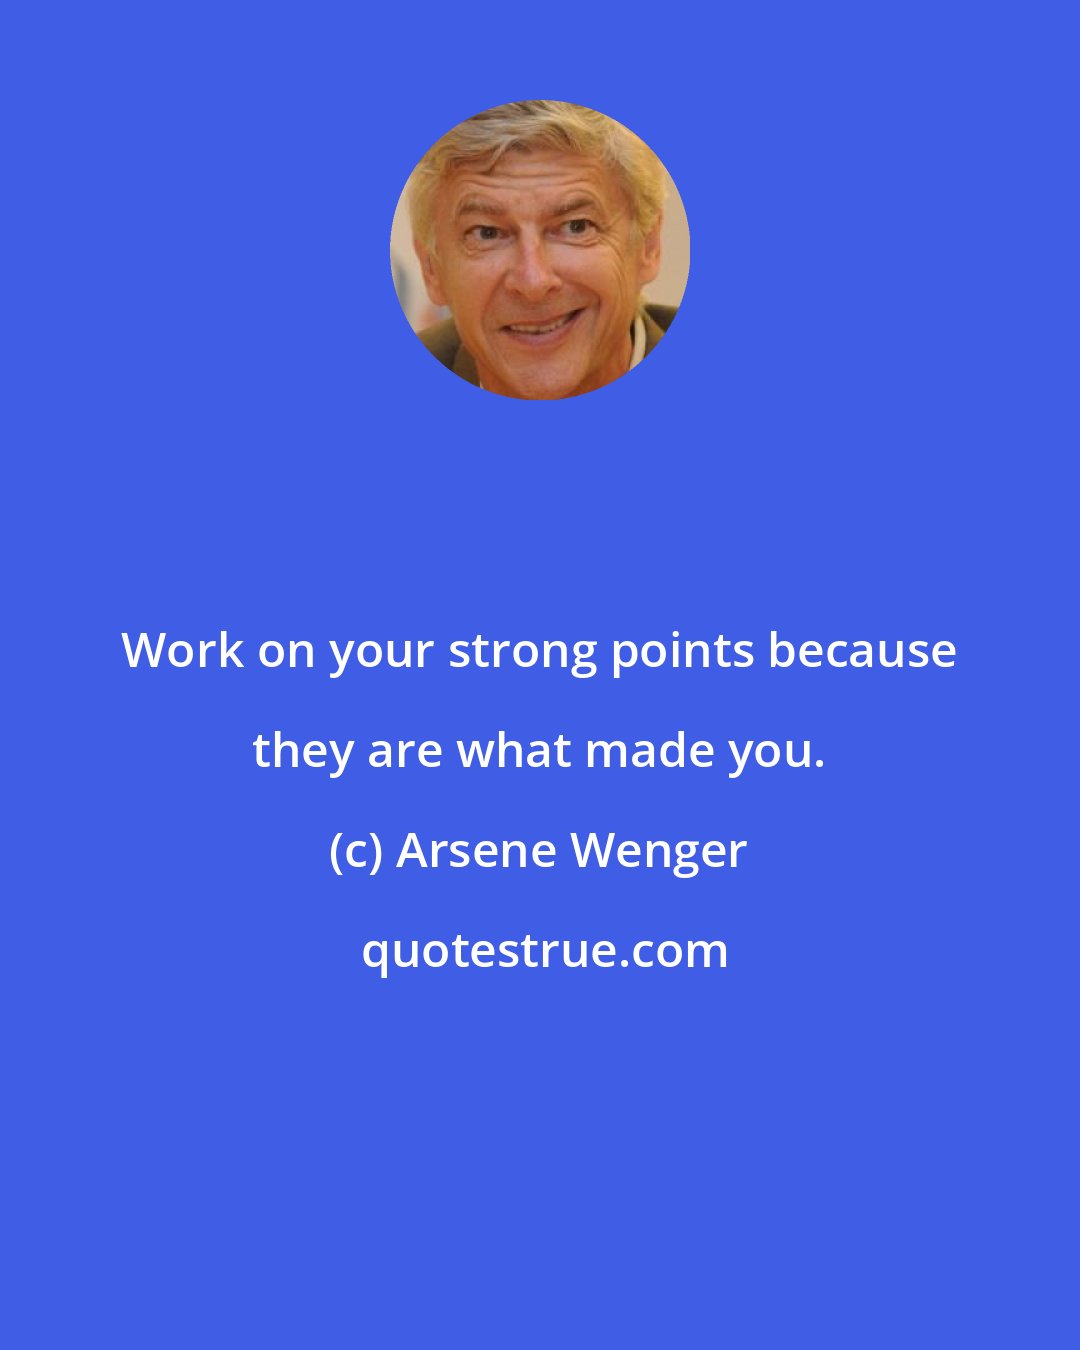 Arsene Wenger: Work on your strong points because they are what made you.